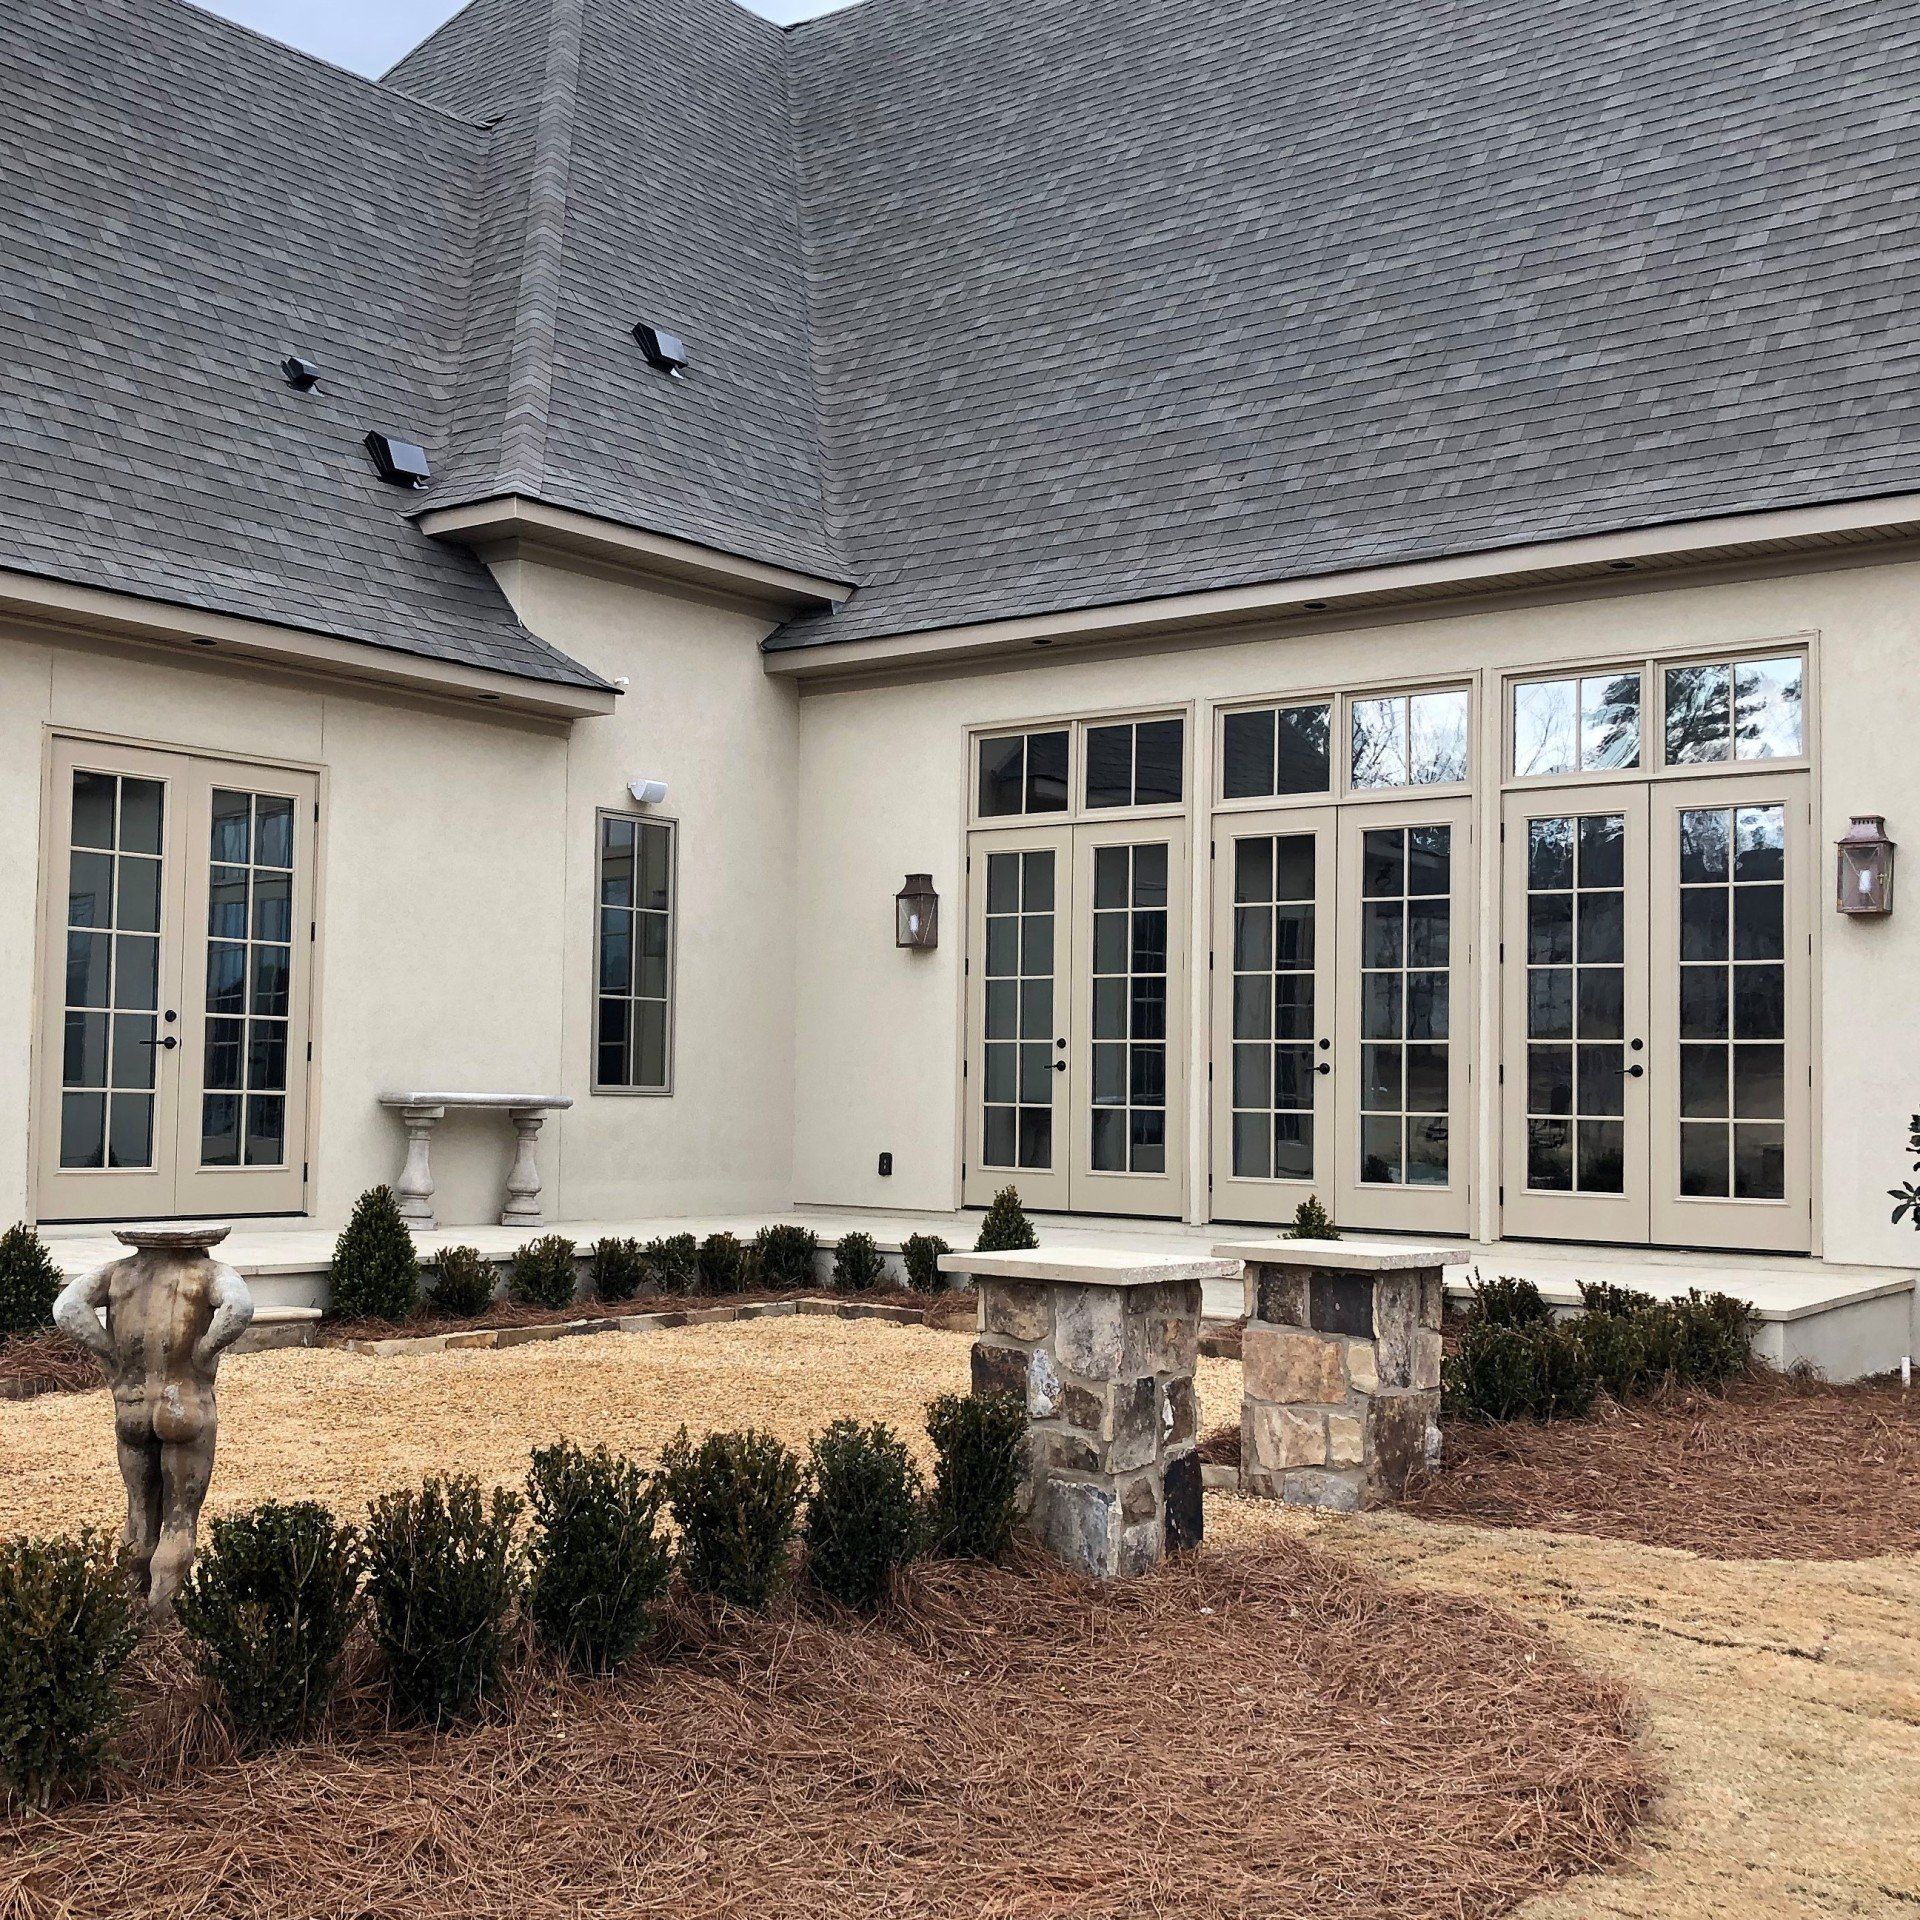 Professional tint installation to home windows and glass doors in Auburn, AL - Residential tinting service Auburn, AL